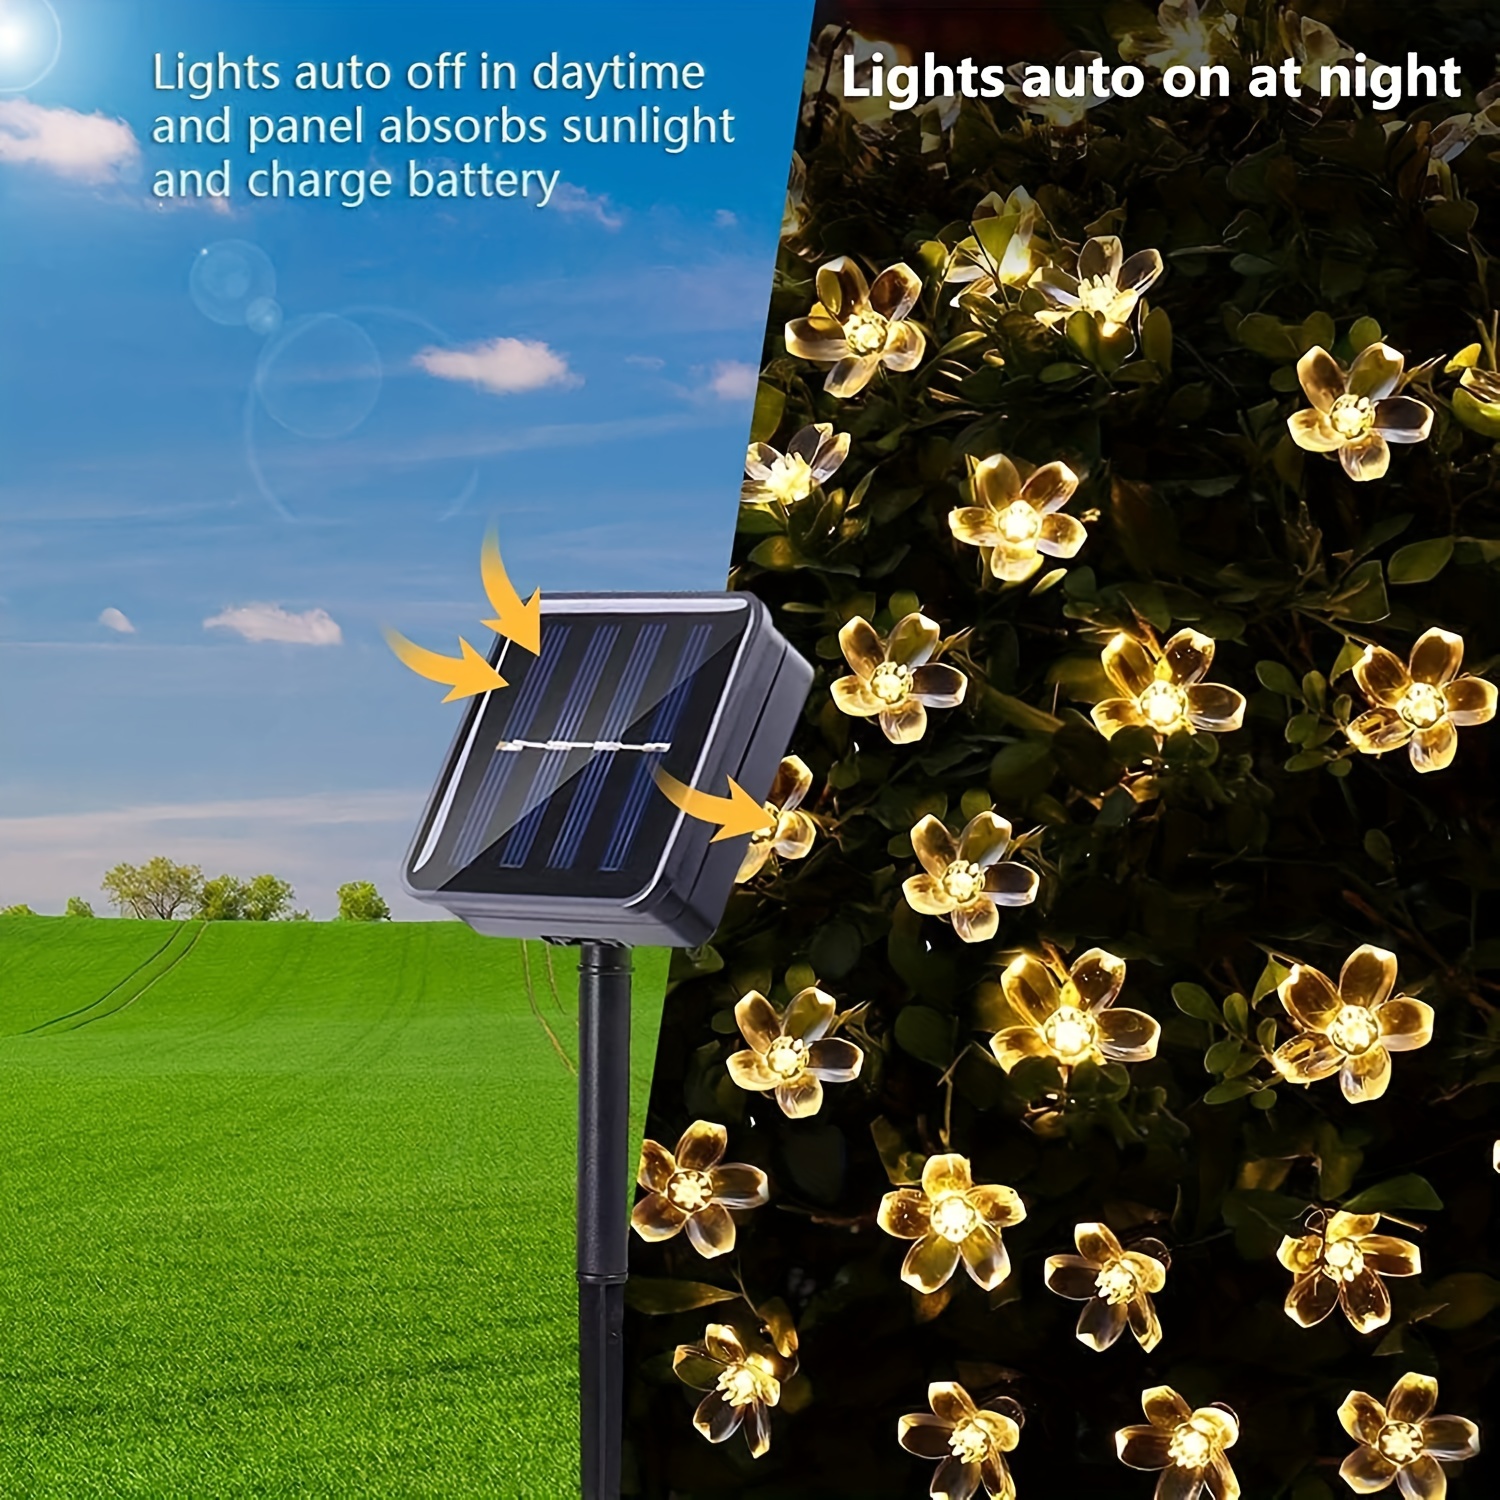 1pc solar string flower light outdoor waterproof 6 5m 21ft 30 led fairy light for garden fence patio yard party dec oration included 2m wire christmas halloween decorations details 6